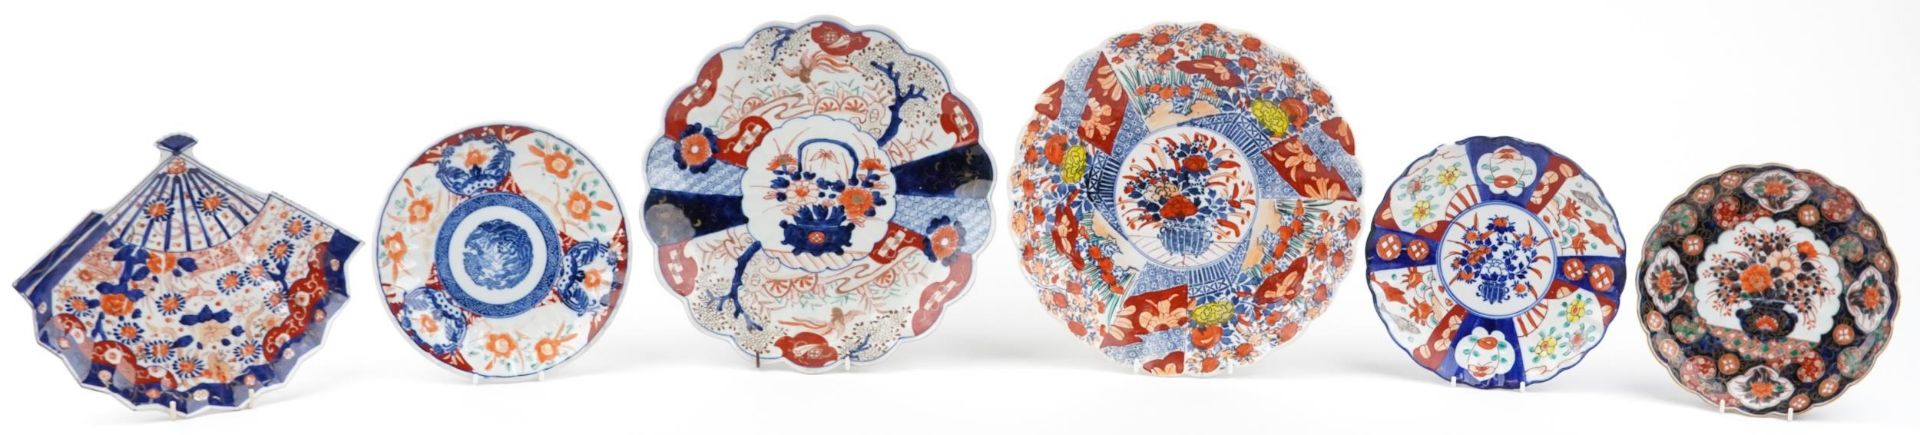 Japanese Imari porcelain comprising two chargers and four dishes, one in the shape of a fan, each